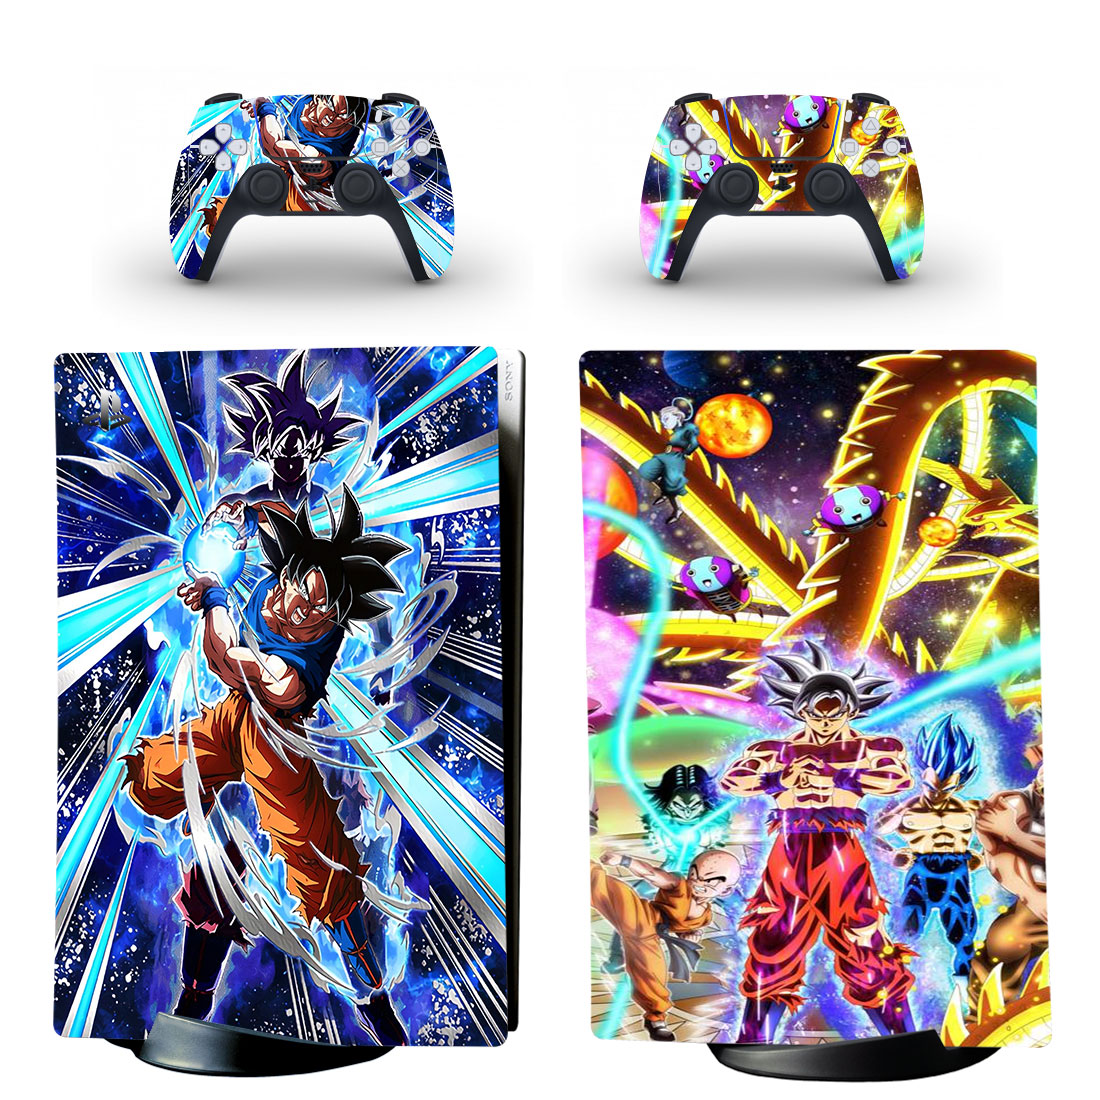 Dragon Ball Z Goku Skin Sticker Decal For PS5 Digital Edition And Controllers